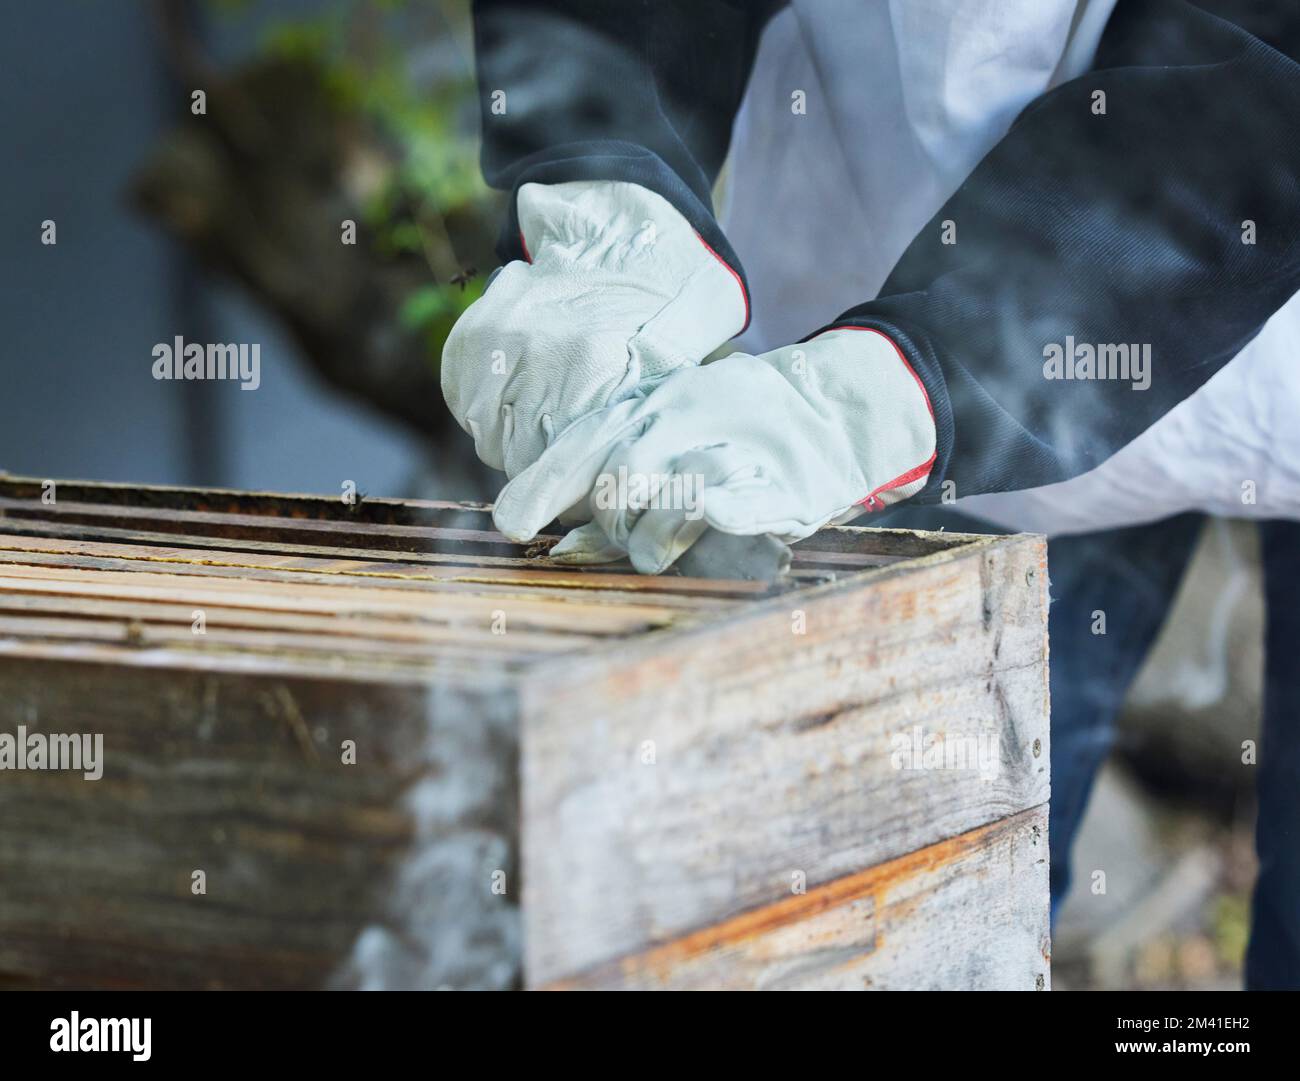 Beekeeping, box frame and beekeeper hands working on honey production farm for honeycomb, organic wax extraction and natural farming. Bees Stock Photo